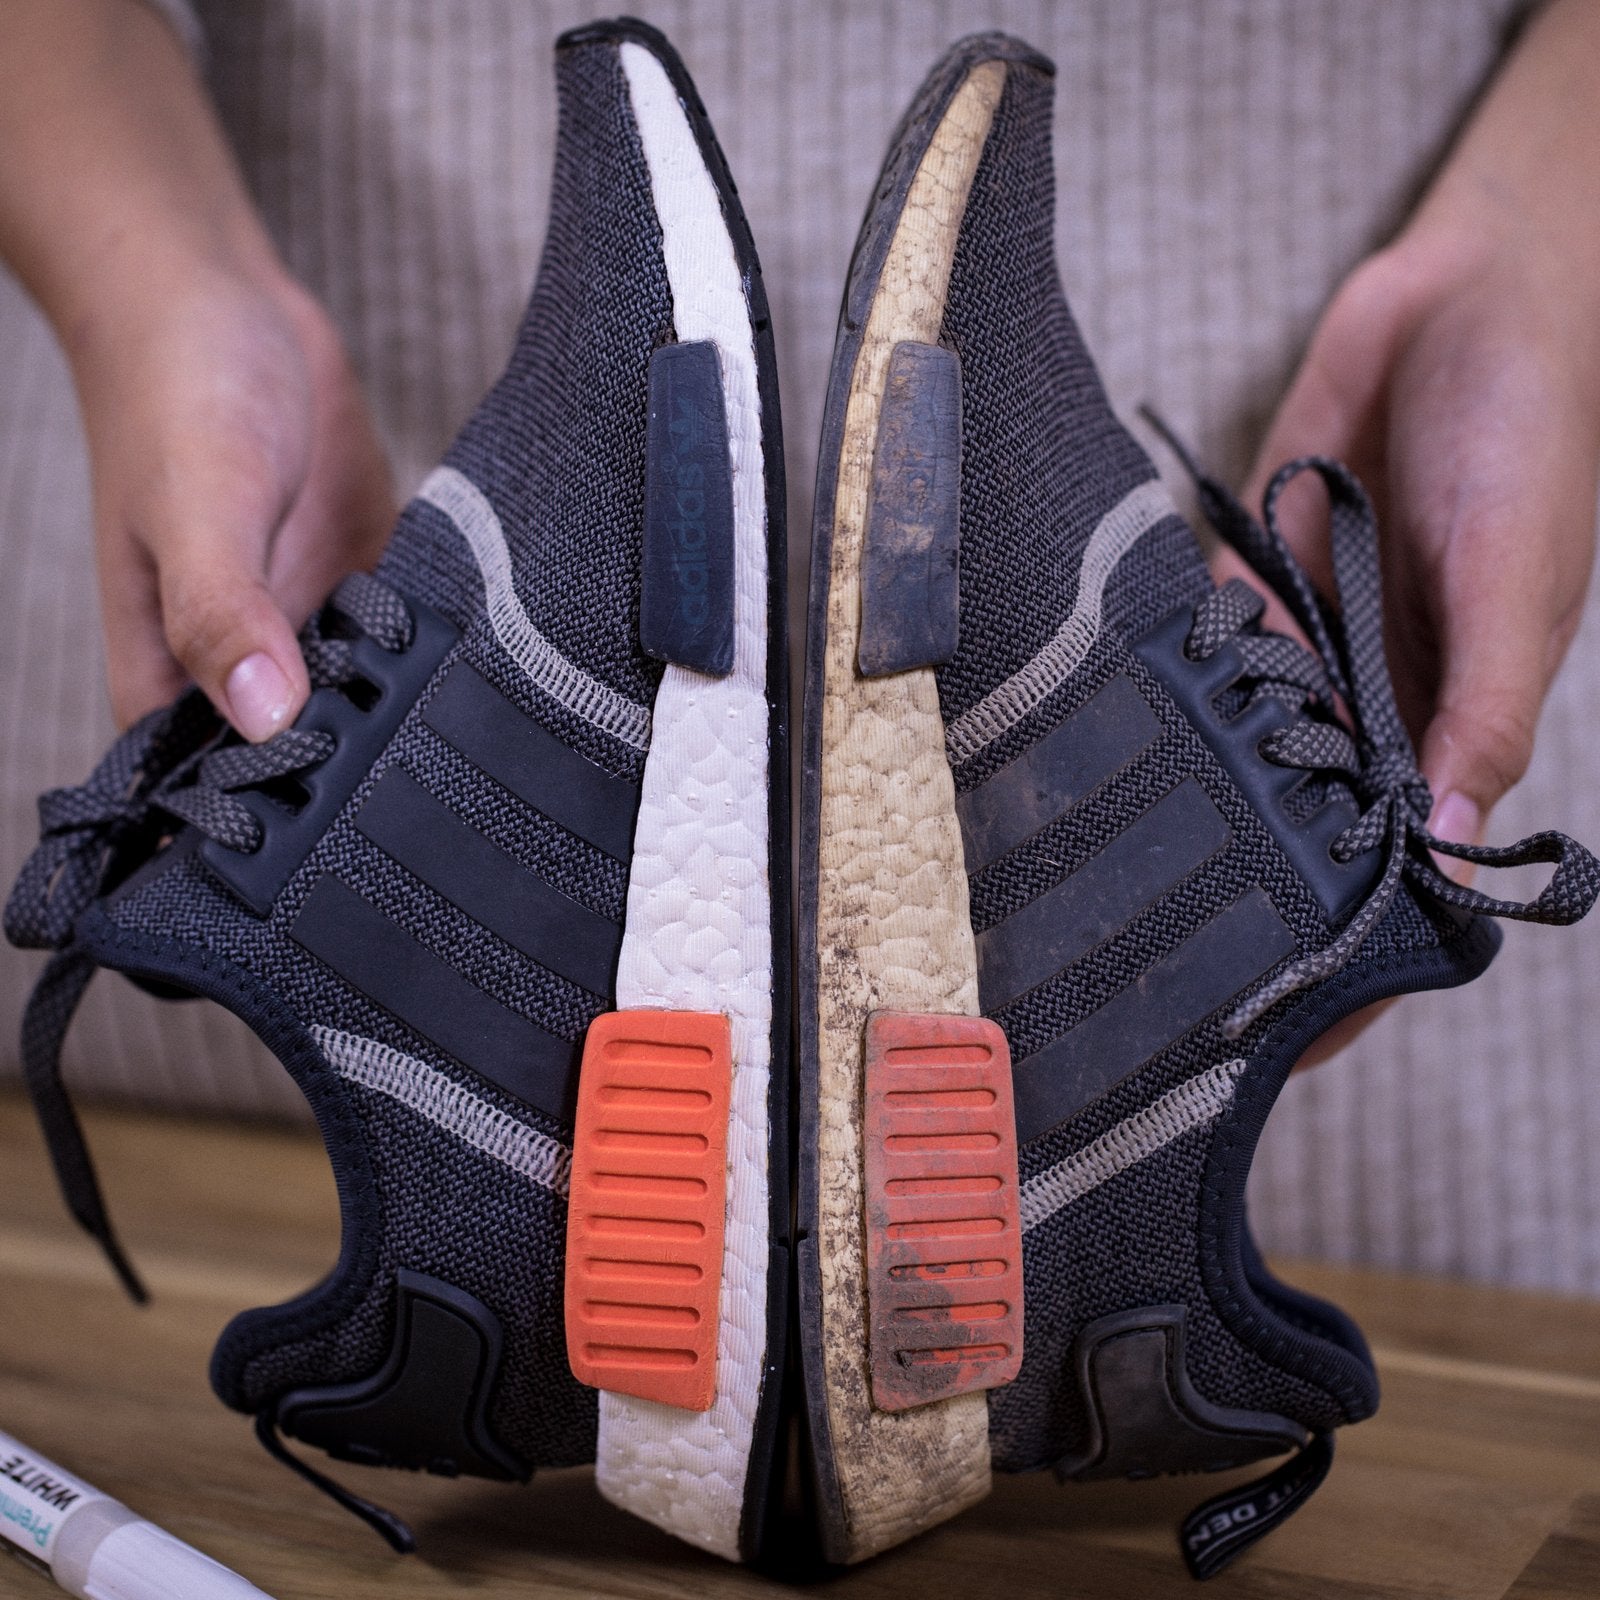 REVIEW] How to restore NMD, Ultra Boost yellowing BOOST l Marker -  WilkinsCleanser